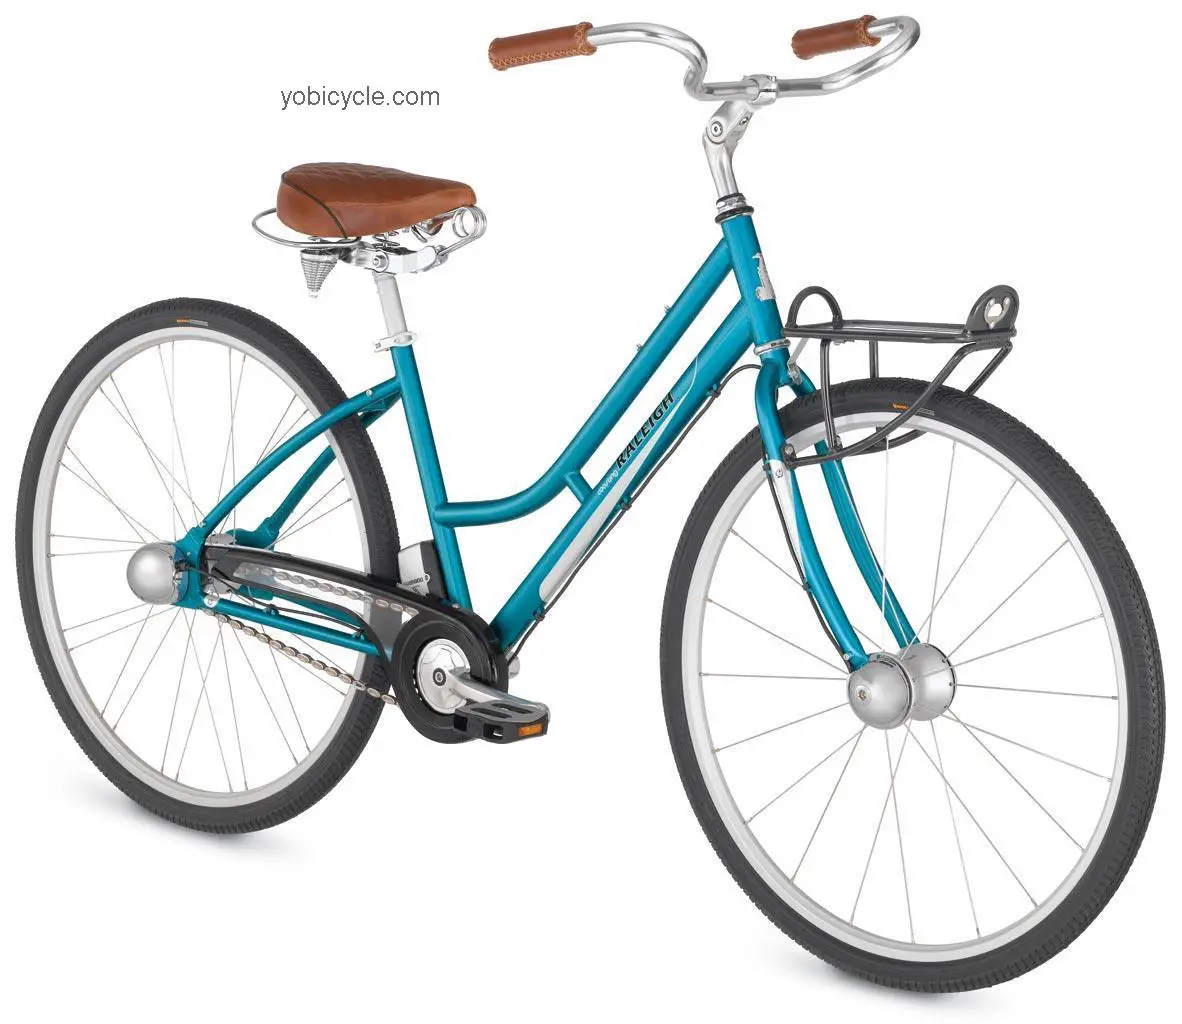 Raleigh  Coasting Technical data and specifications